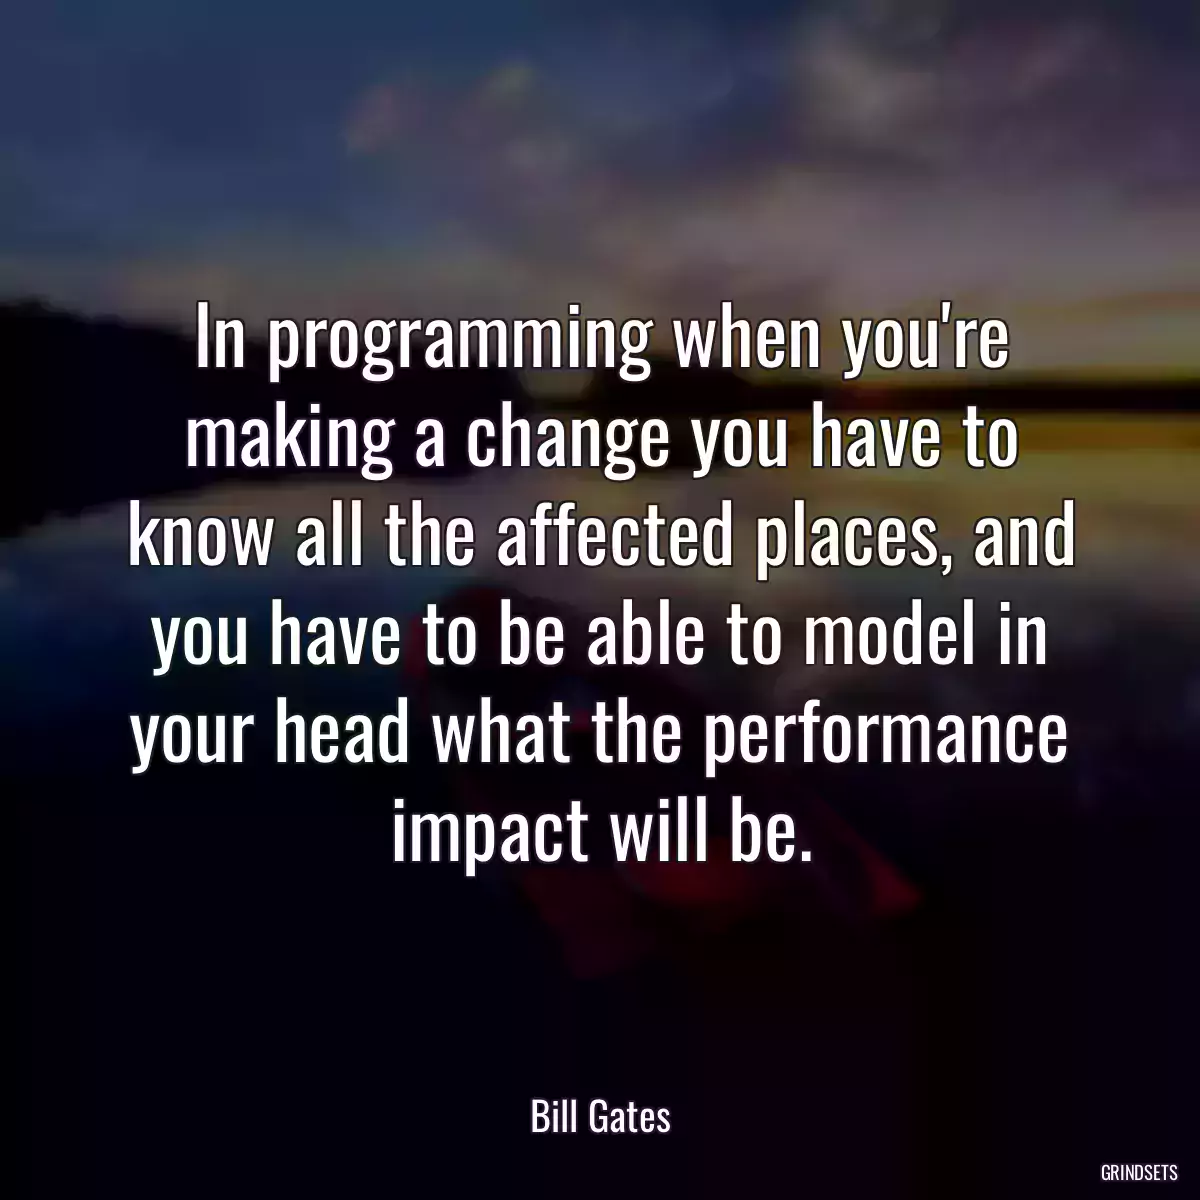 In programming when you\'re making a change you have to know all the affected places, and you have to be able to model in your head what the performance impact will be.